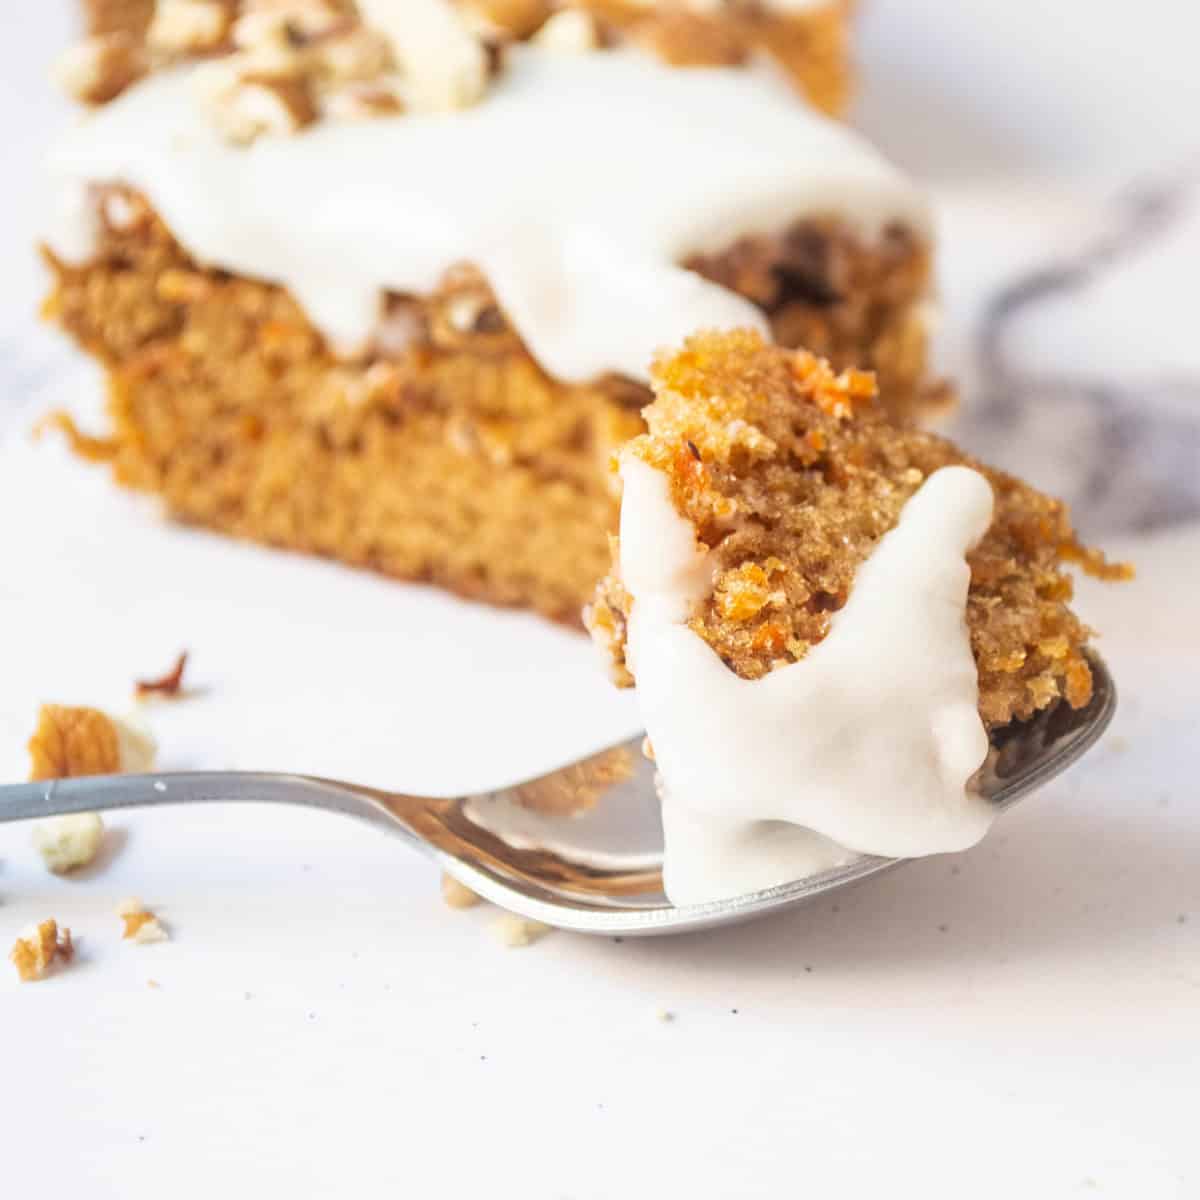 A spoonful of carrot cake with glaze.